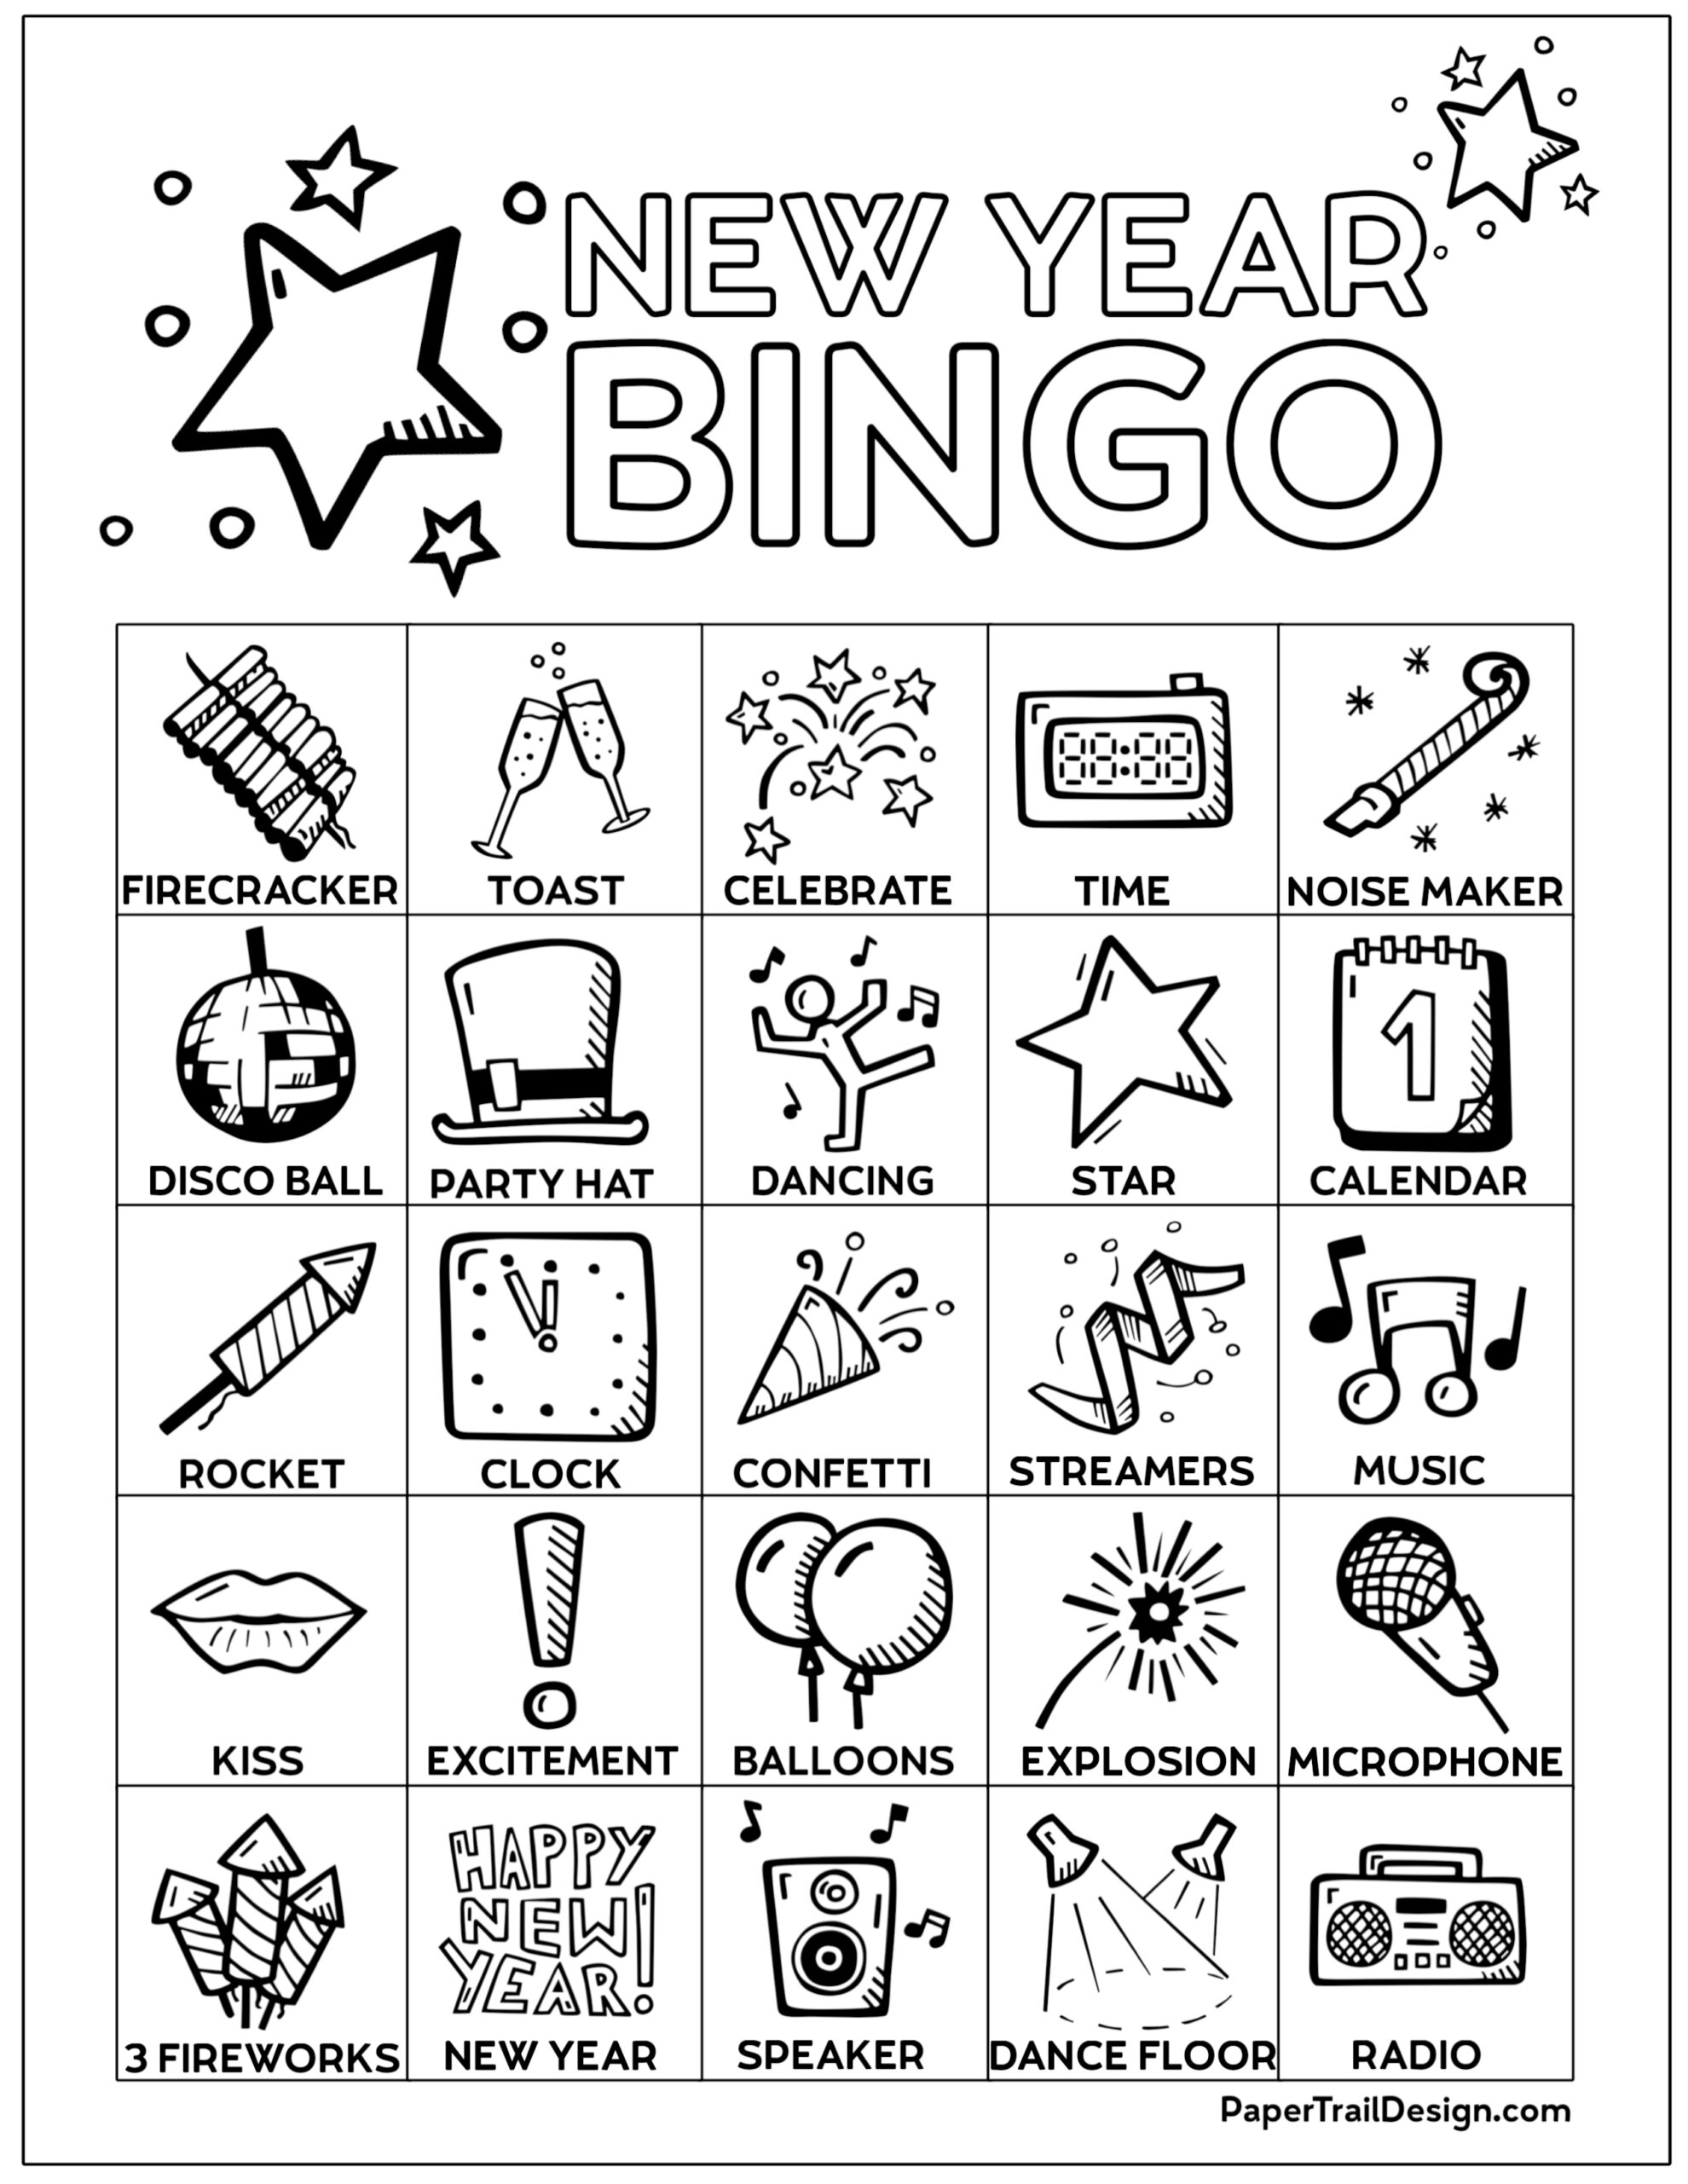 New Year's Eve Bingo Game for Kids - Toddler Approved